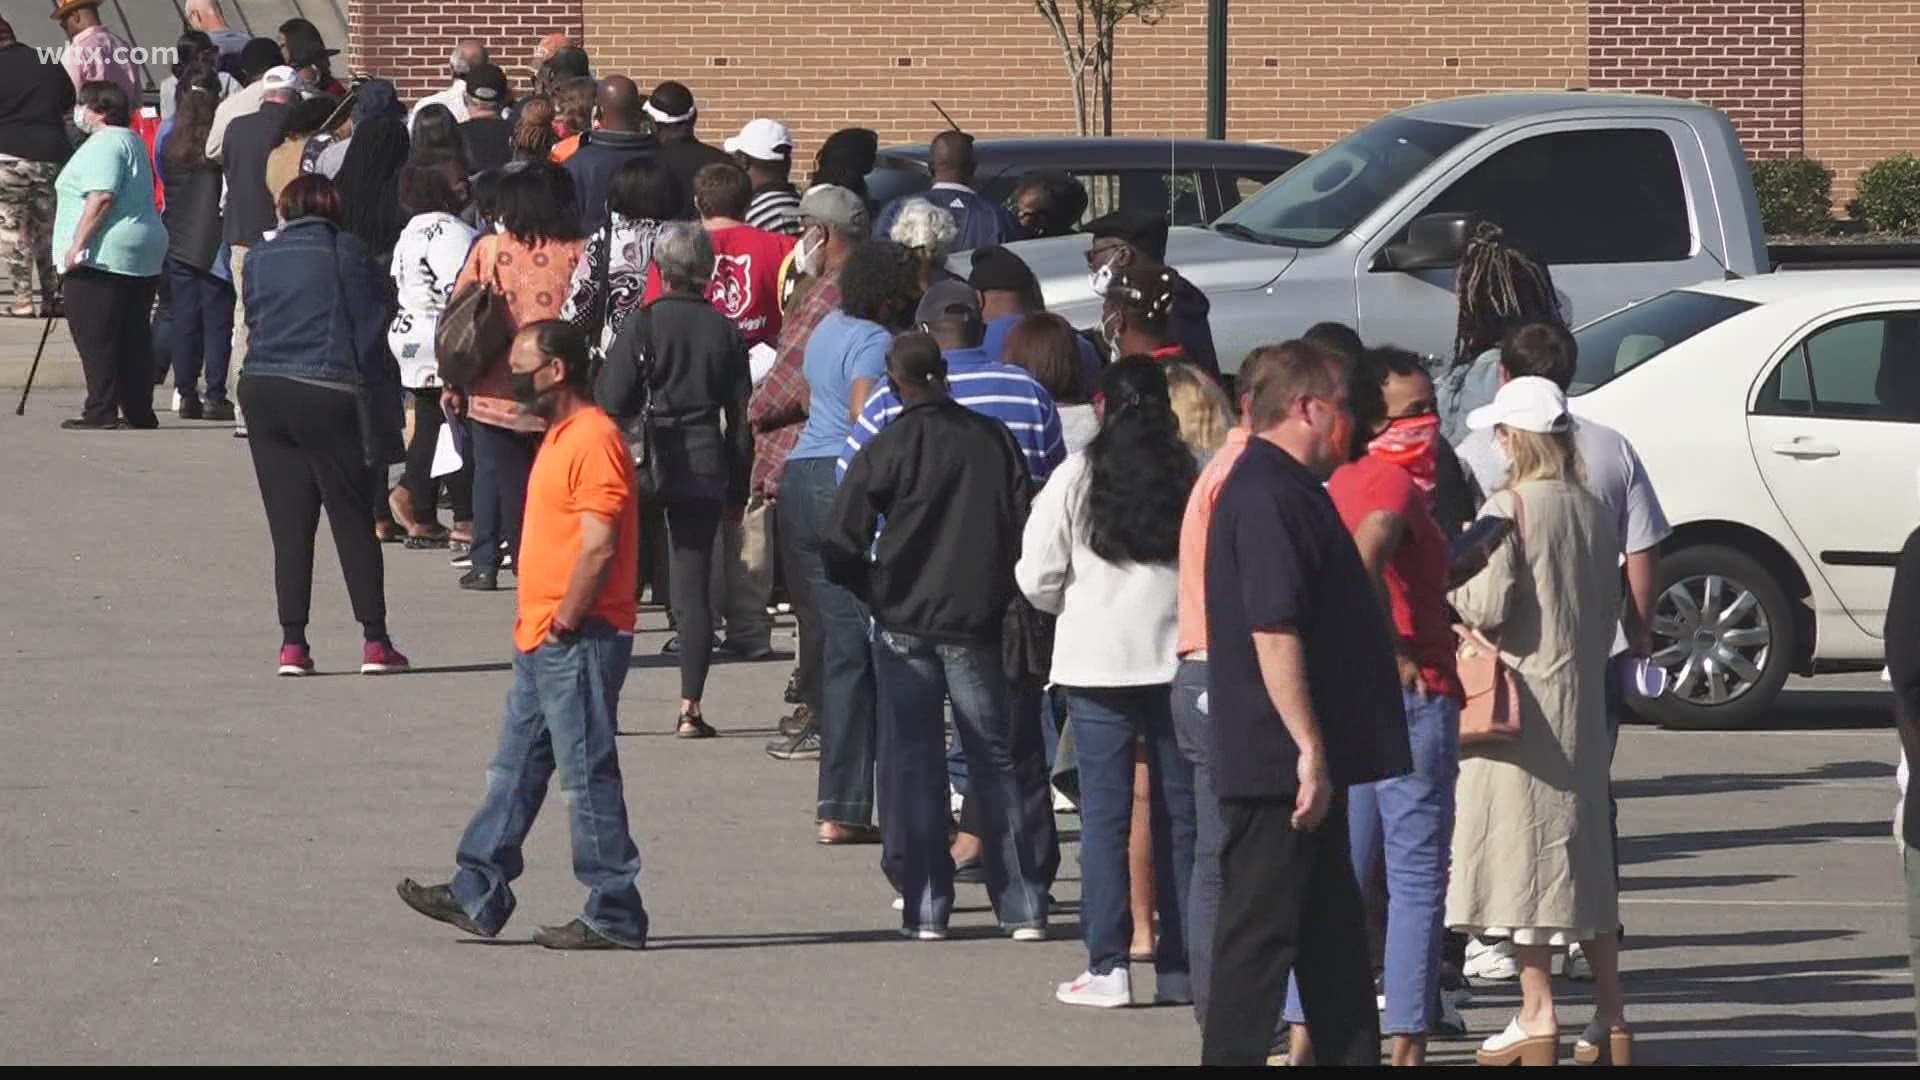 The clinic at the Orangeburg gym was popular with hundreds showing up.